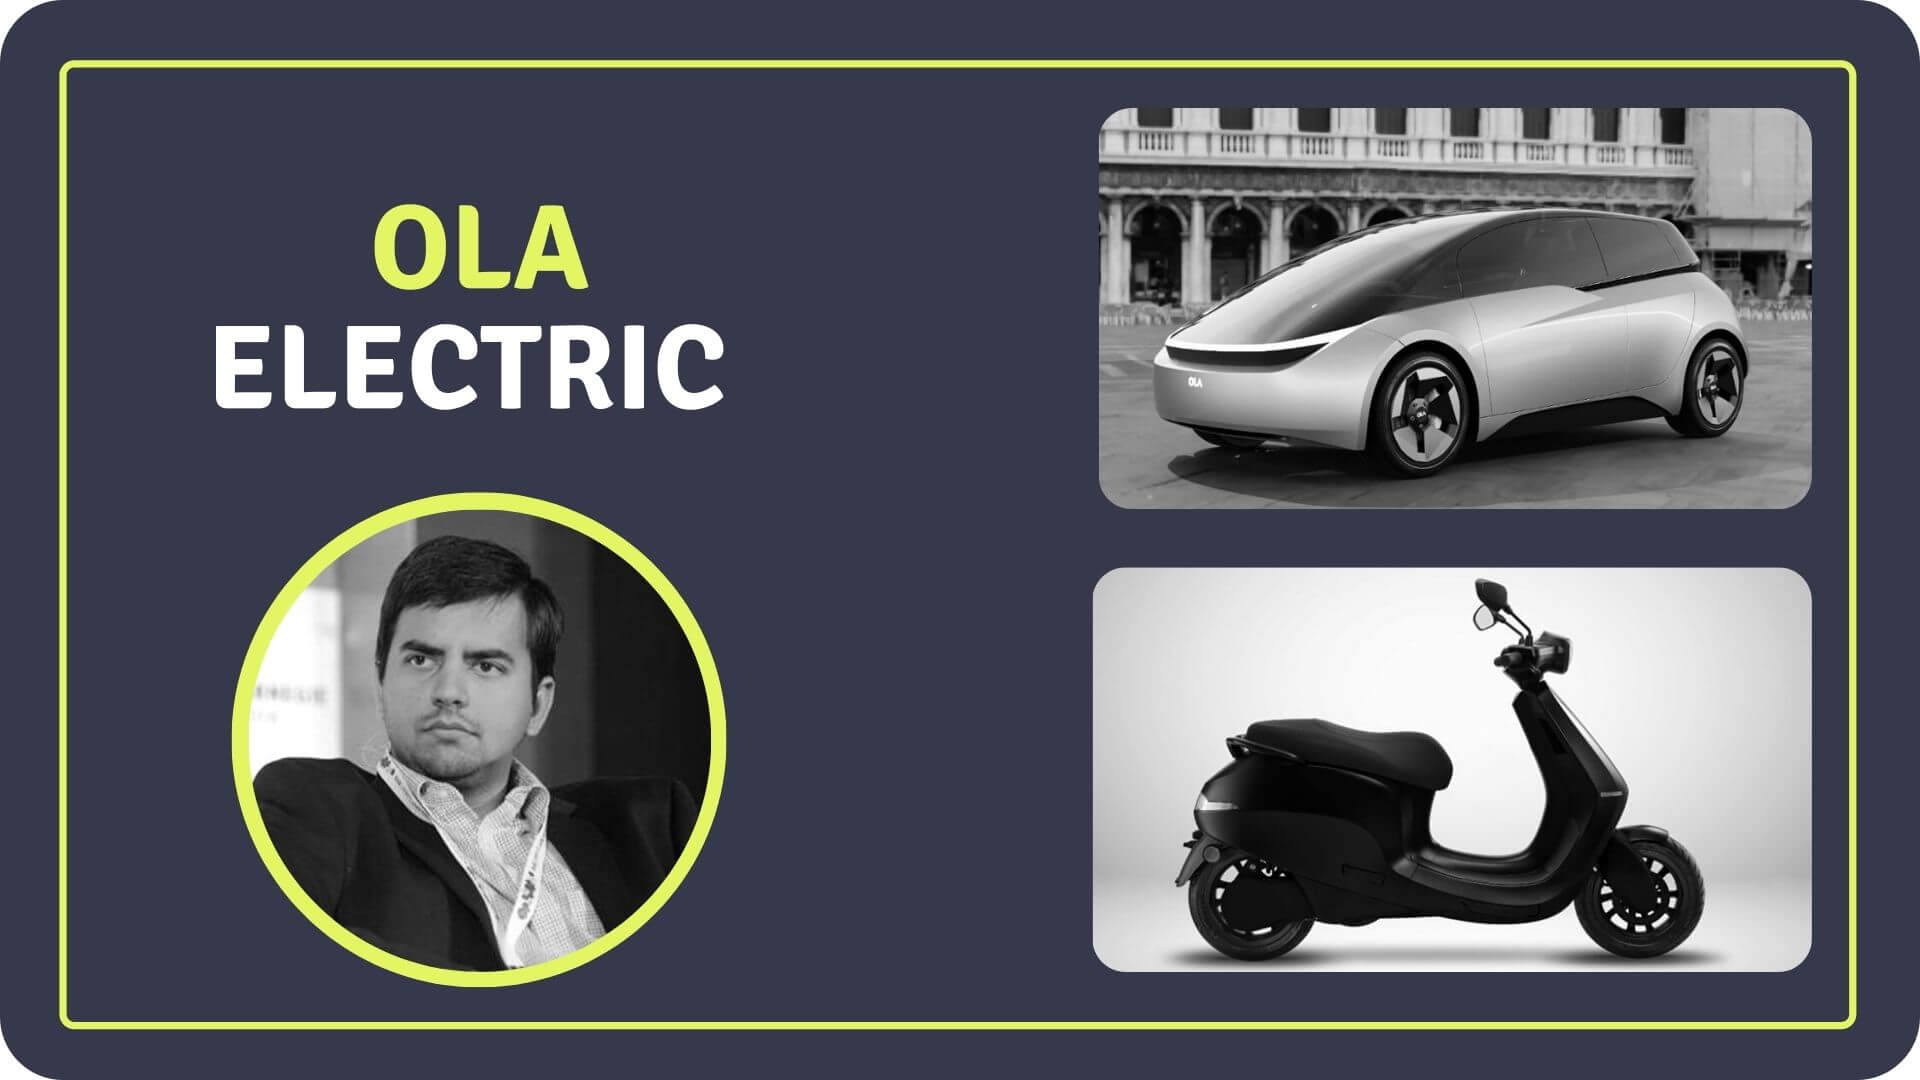 https://e-vehicleinfo.com/ola-electric-scooter-not-even-on-road-now-electric-car/